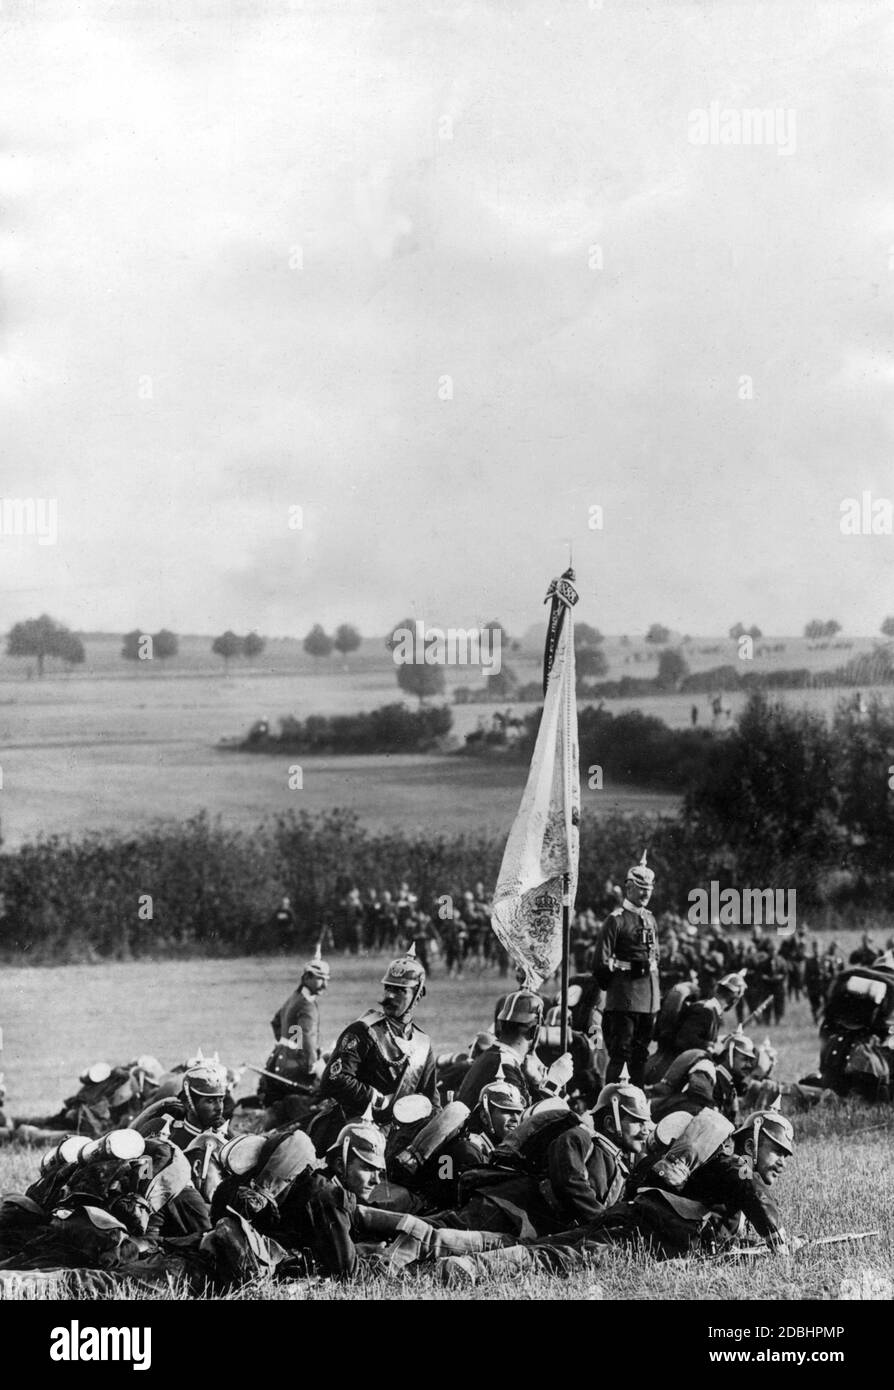 Imperial maneuver in September 1904, during which the flags of the fighting troops are carried along, as they have been done in past centuries. The spiked helmets and spearheads are flashing. Stock Photo